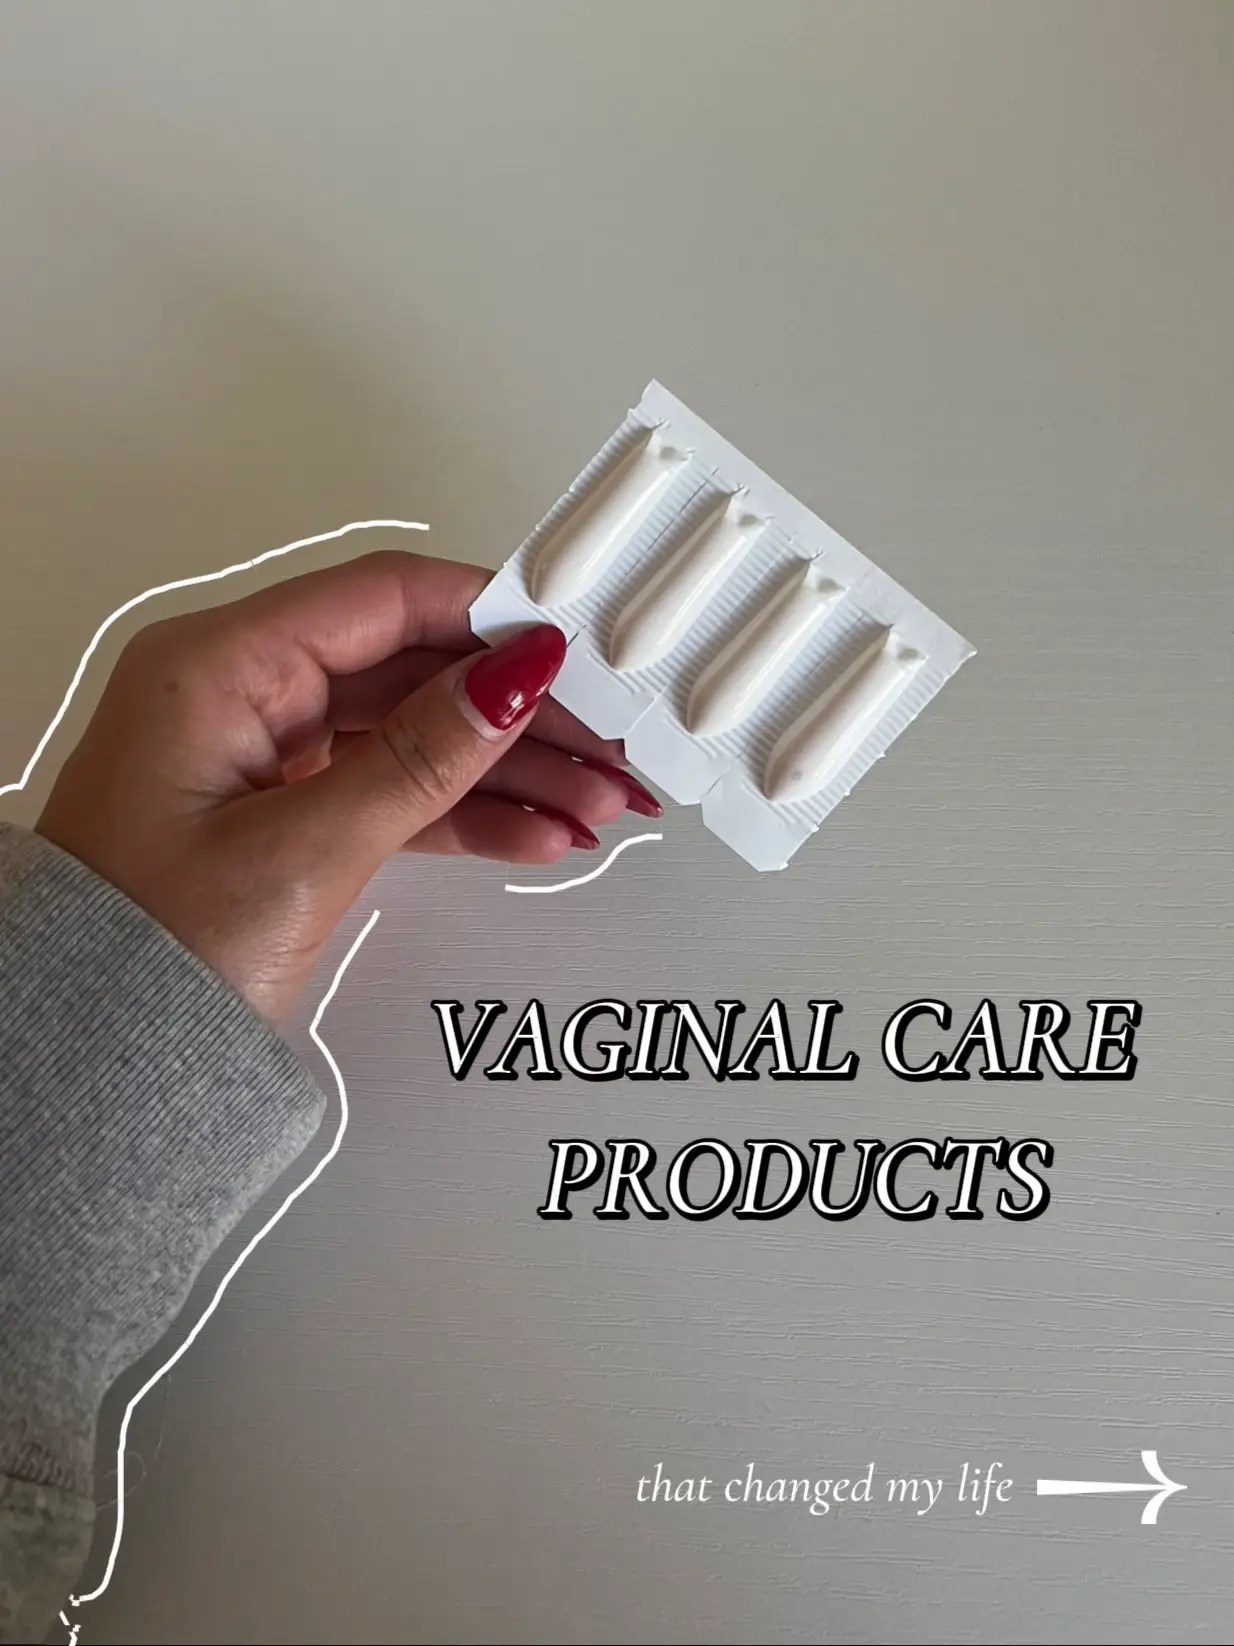 Vaginal Care Products 101 's images